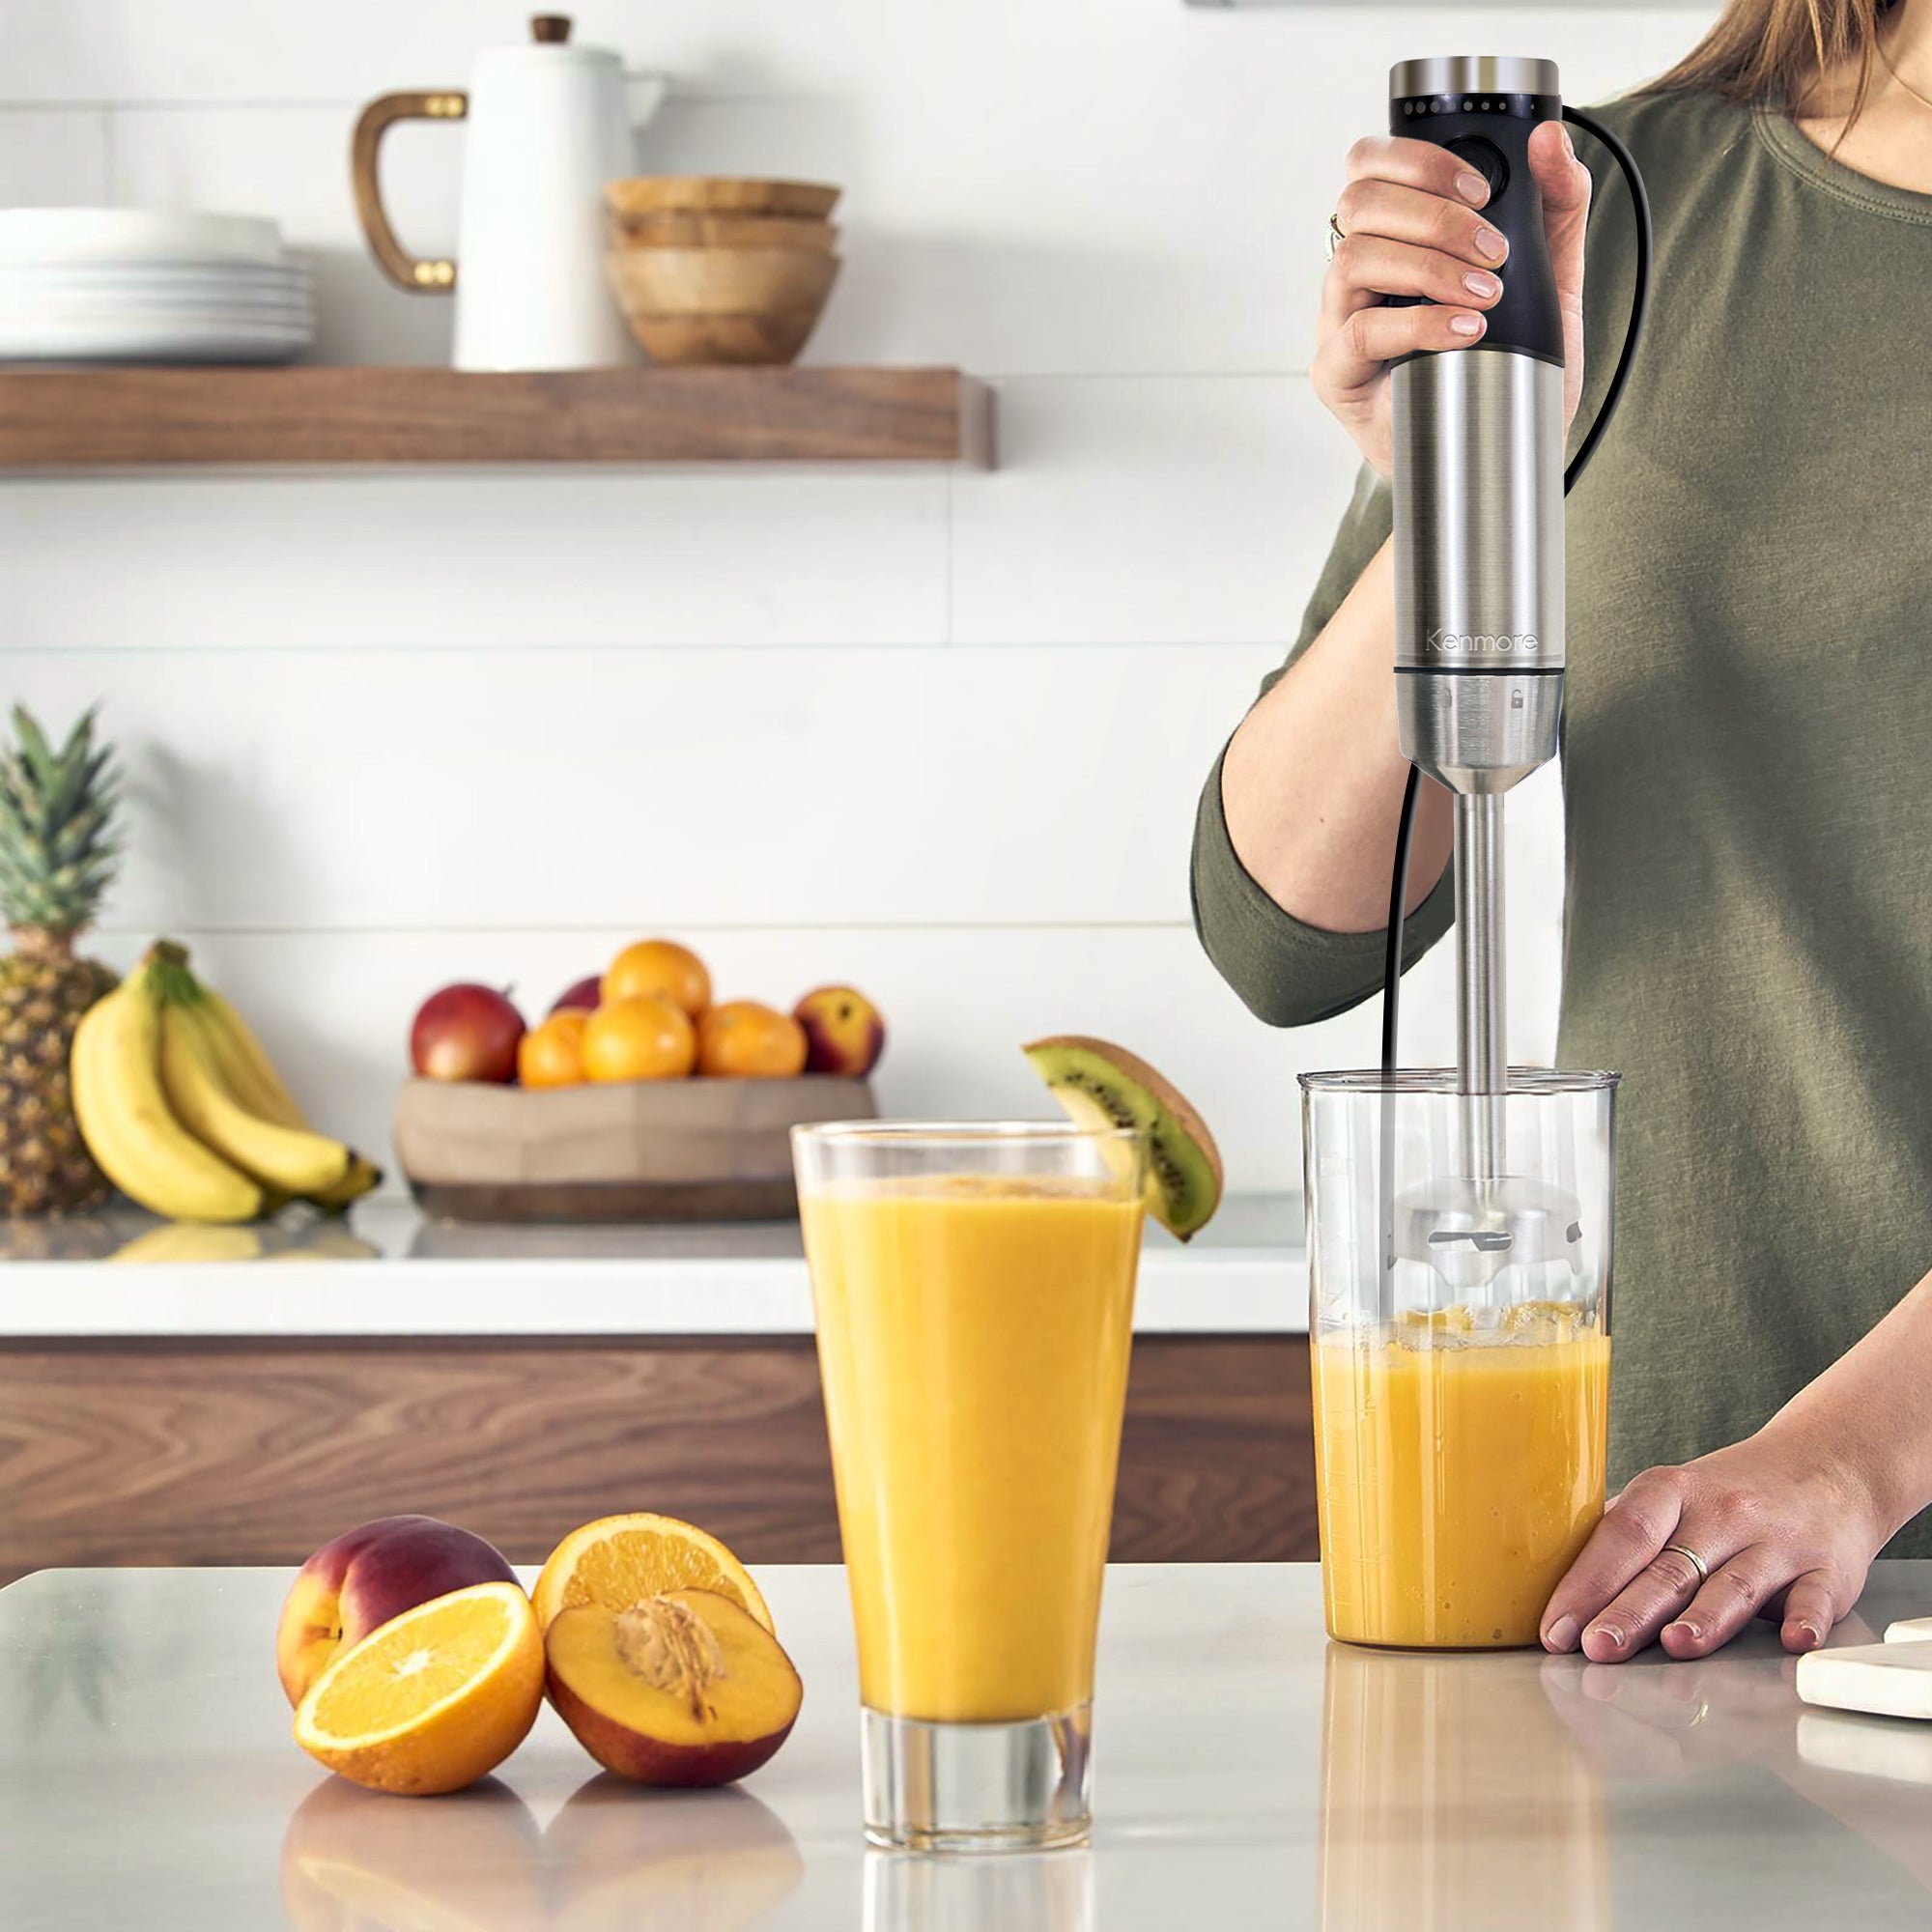 Light-skinned person in an olive-green shirt using the hand blender to puree an orange-coloured smoothie on a beige counter. There are oranges and peaches beside a glass of orange smoothie in the foreground and another kitchen counter with bowls of fruit in the background